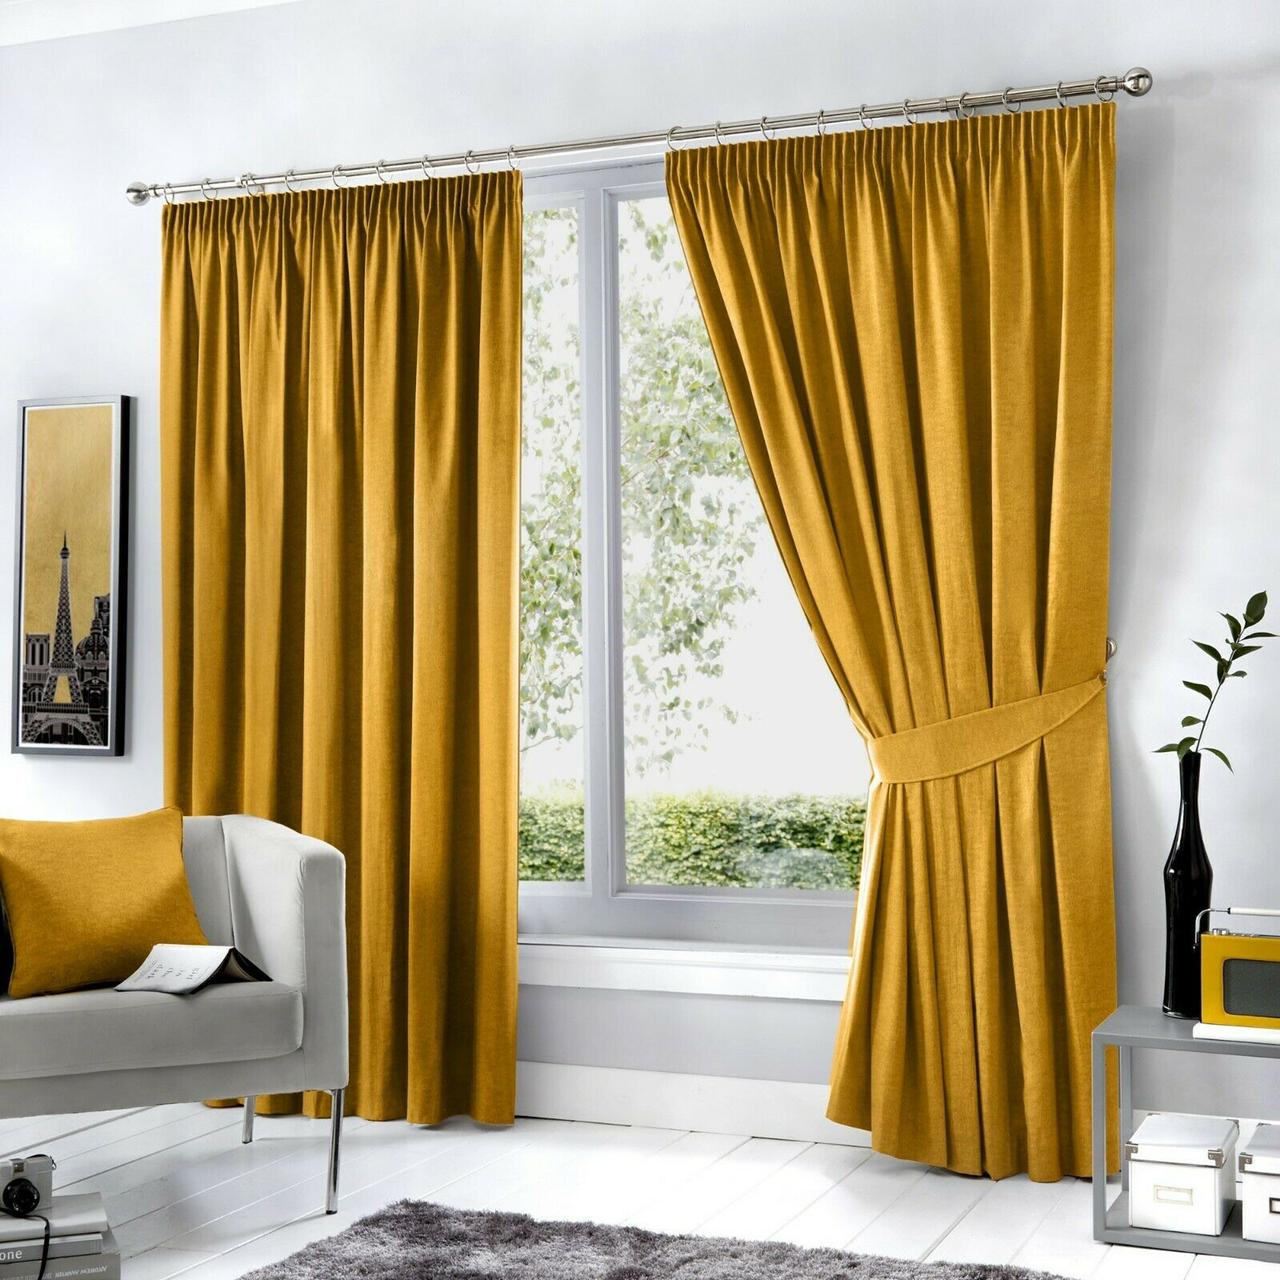 Beyond The Pane: Unveiling The Magic Of Curtains